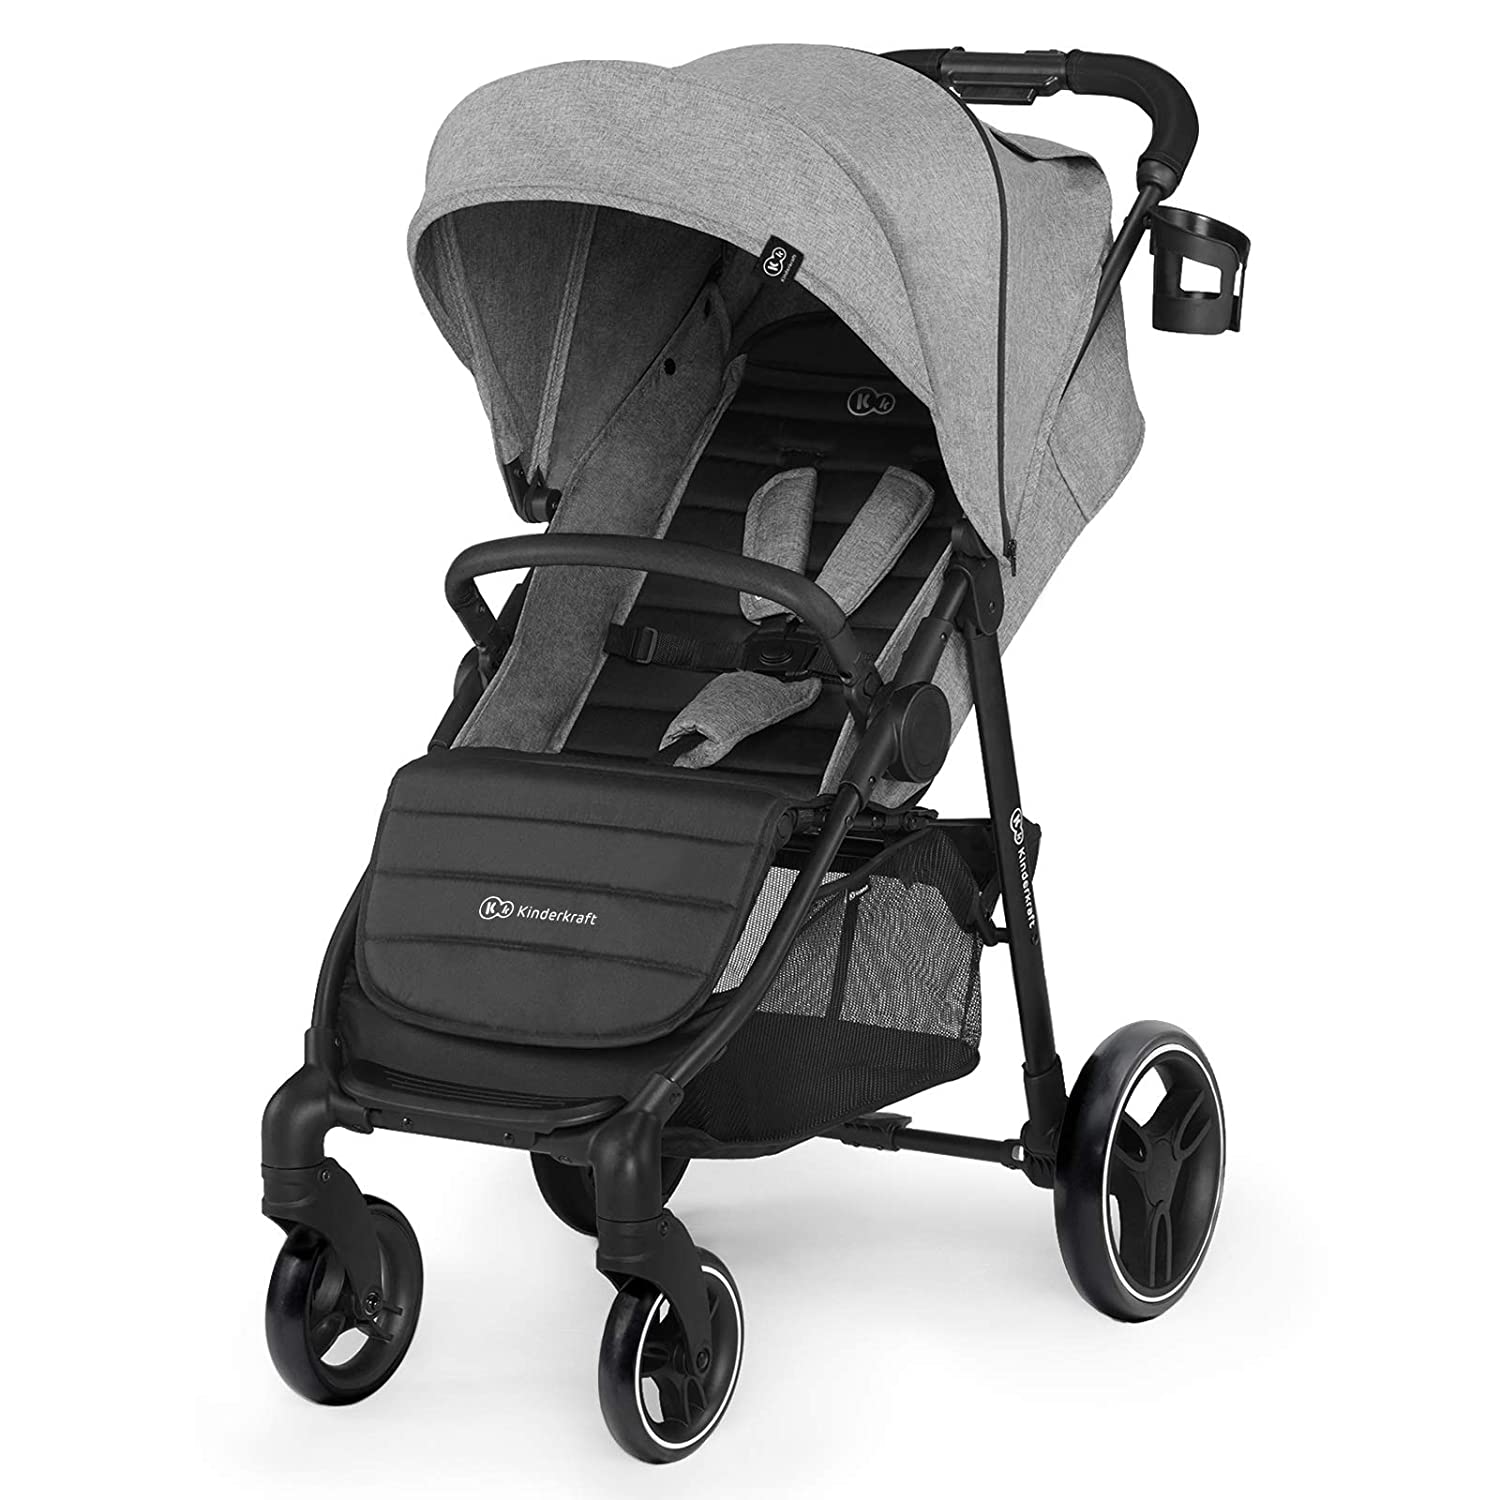 Kinderkraft Grande City Pushchair, Lounger Buggy, Sports Pushchair, Large and Comfortable Buggy, Folding with Sleep Function, Spacious Seat, Accessories, for Children from 0 to 3 Years, Grey